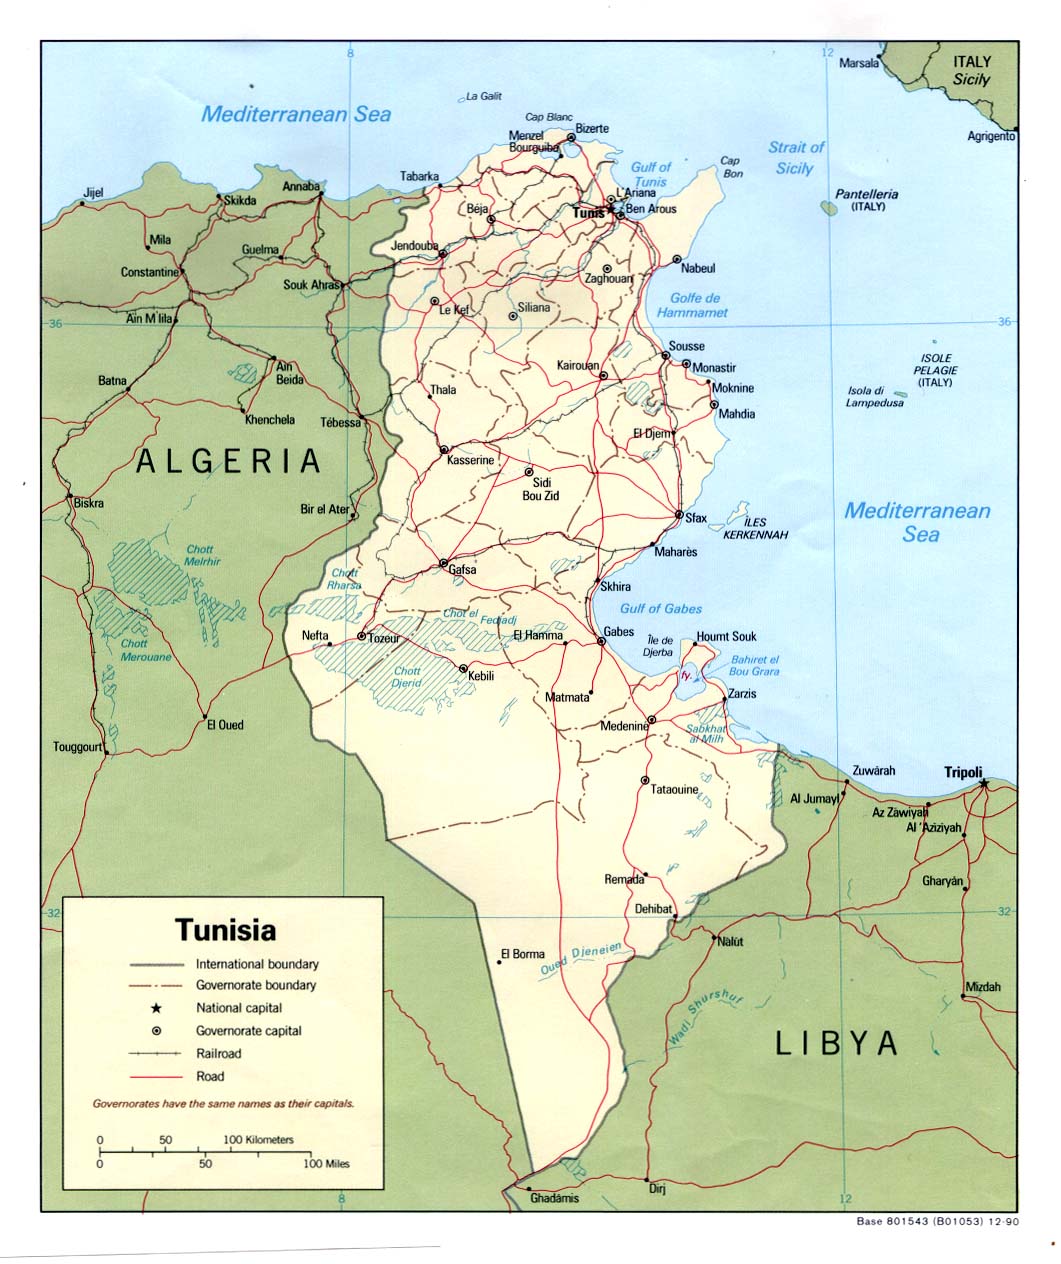 TUNISIA Maps - Perry-Casta��eda Map Collection - UT Library Online